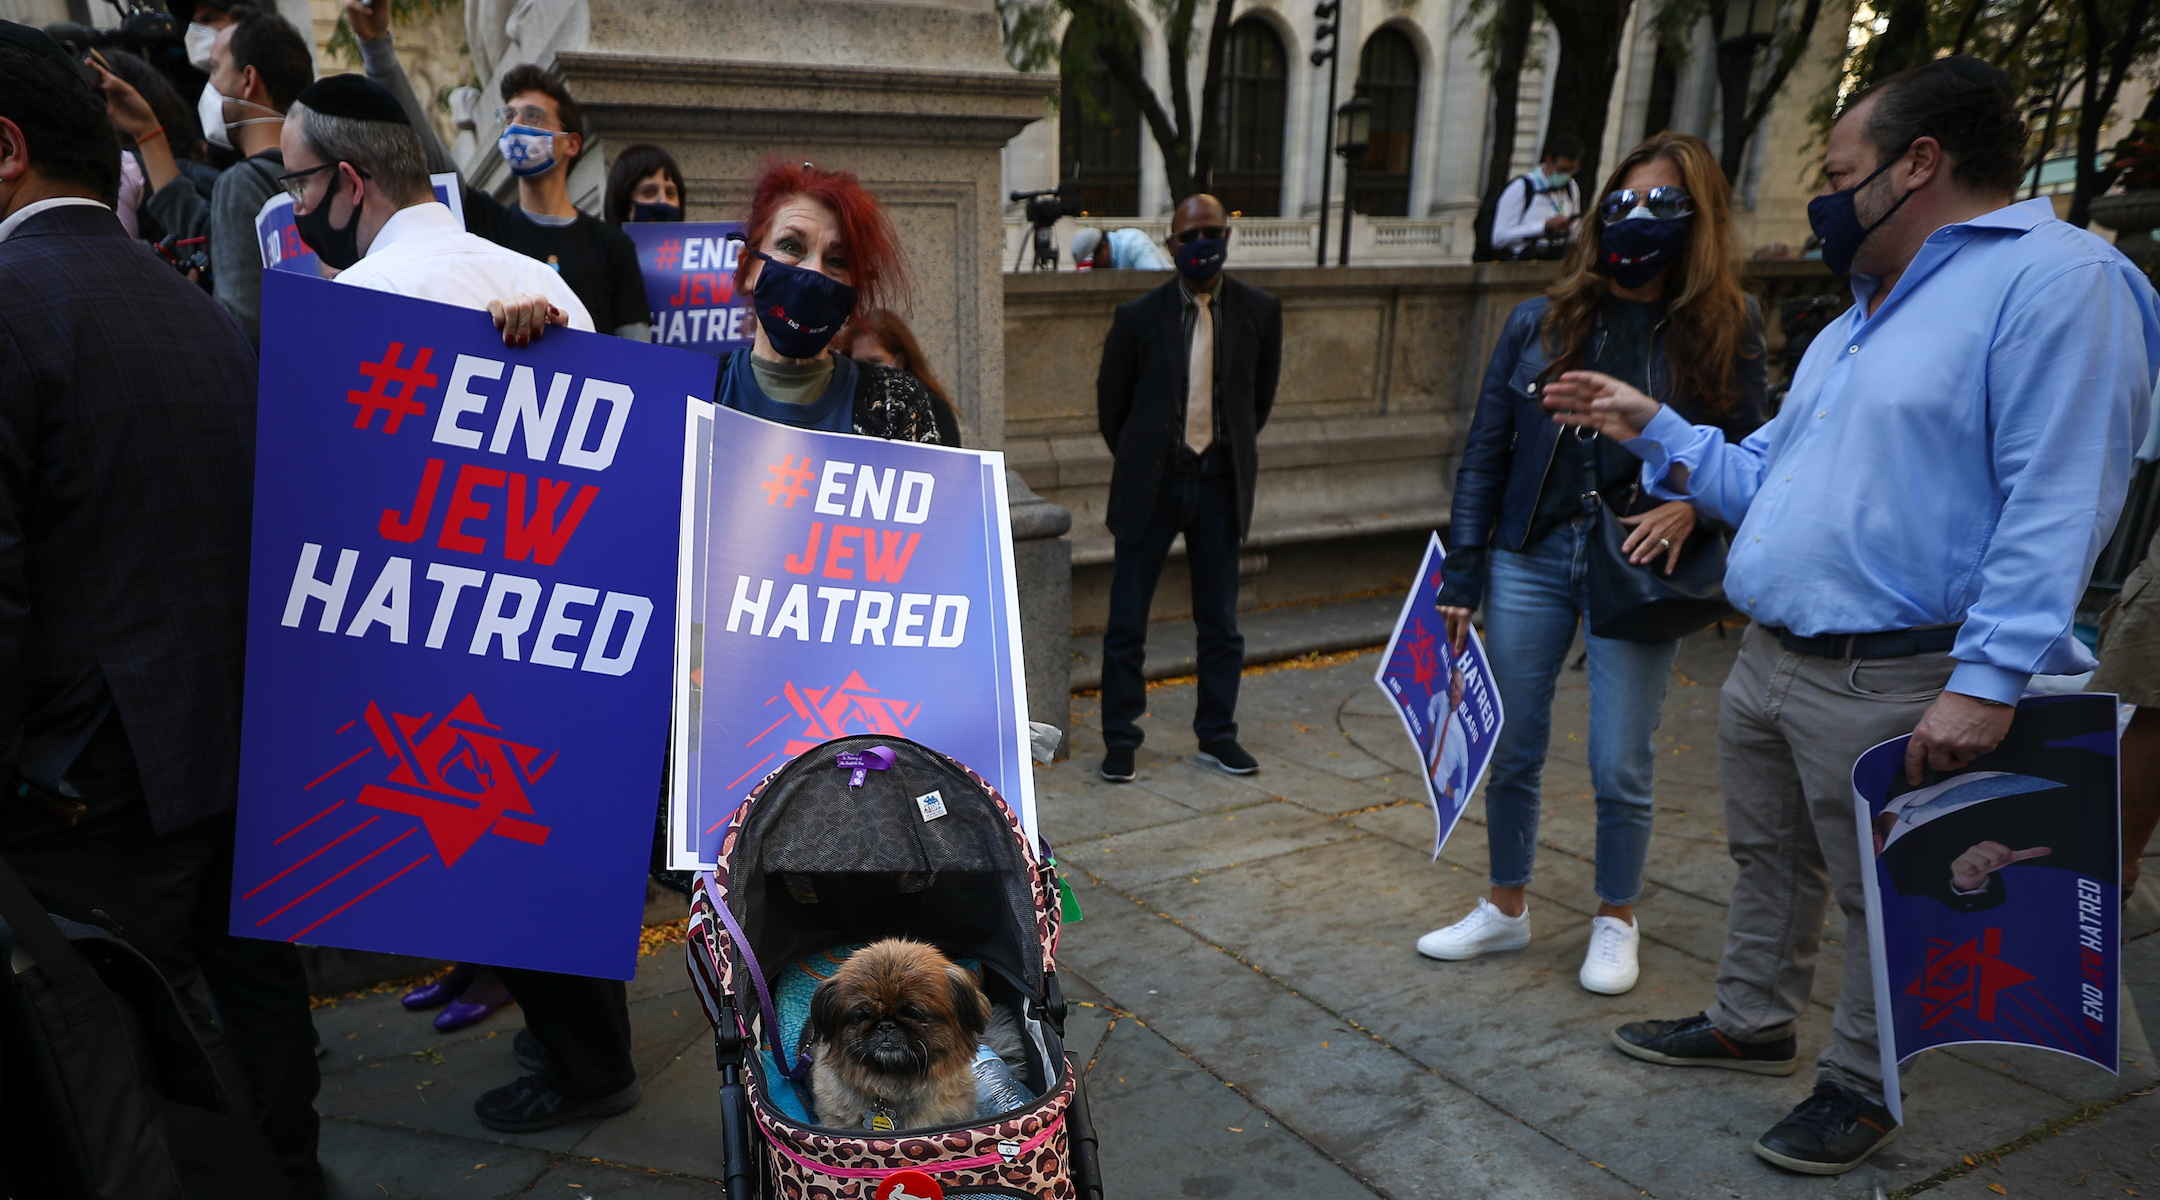 A crowd protests against anti-Semitism in New York City on October 15, 2020. (Tayfun Coskun/Anadolu Agency via Getty Images)